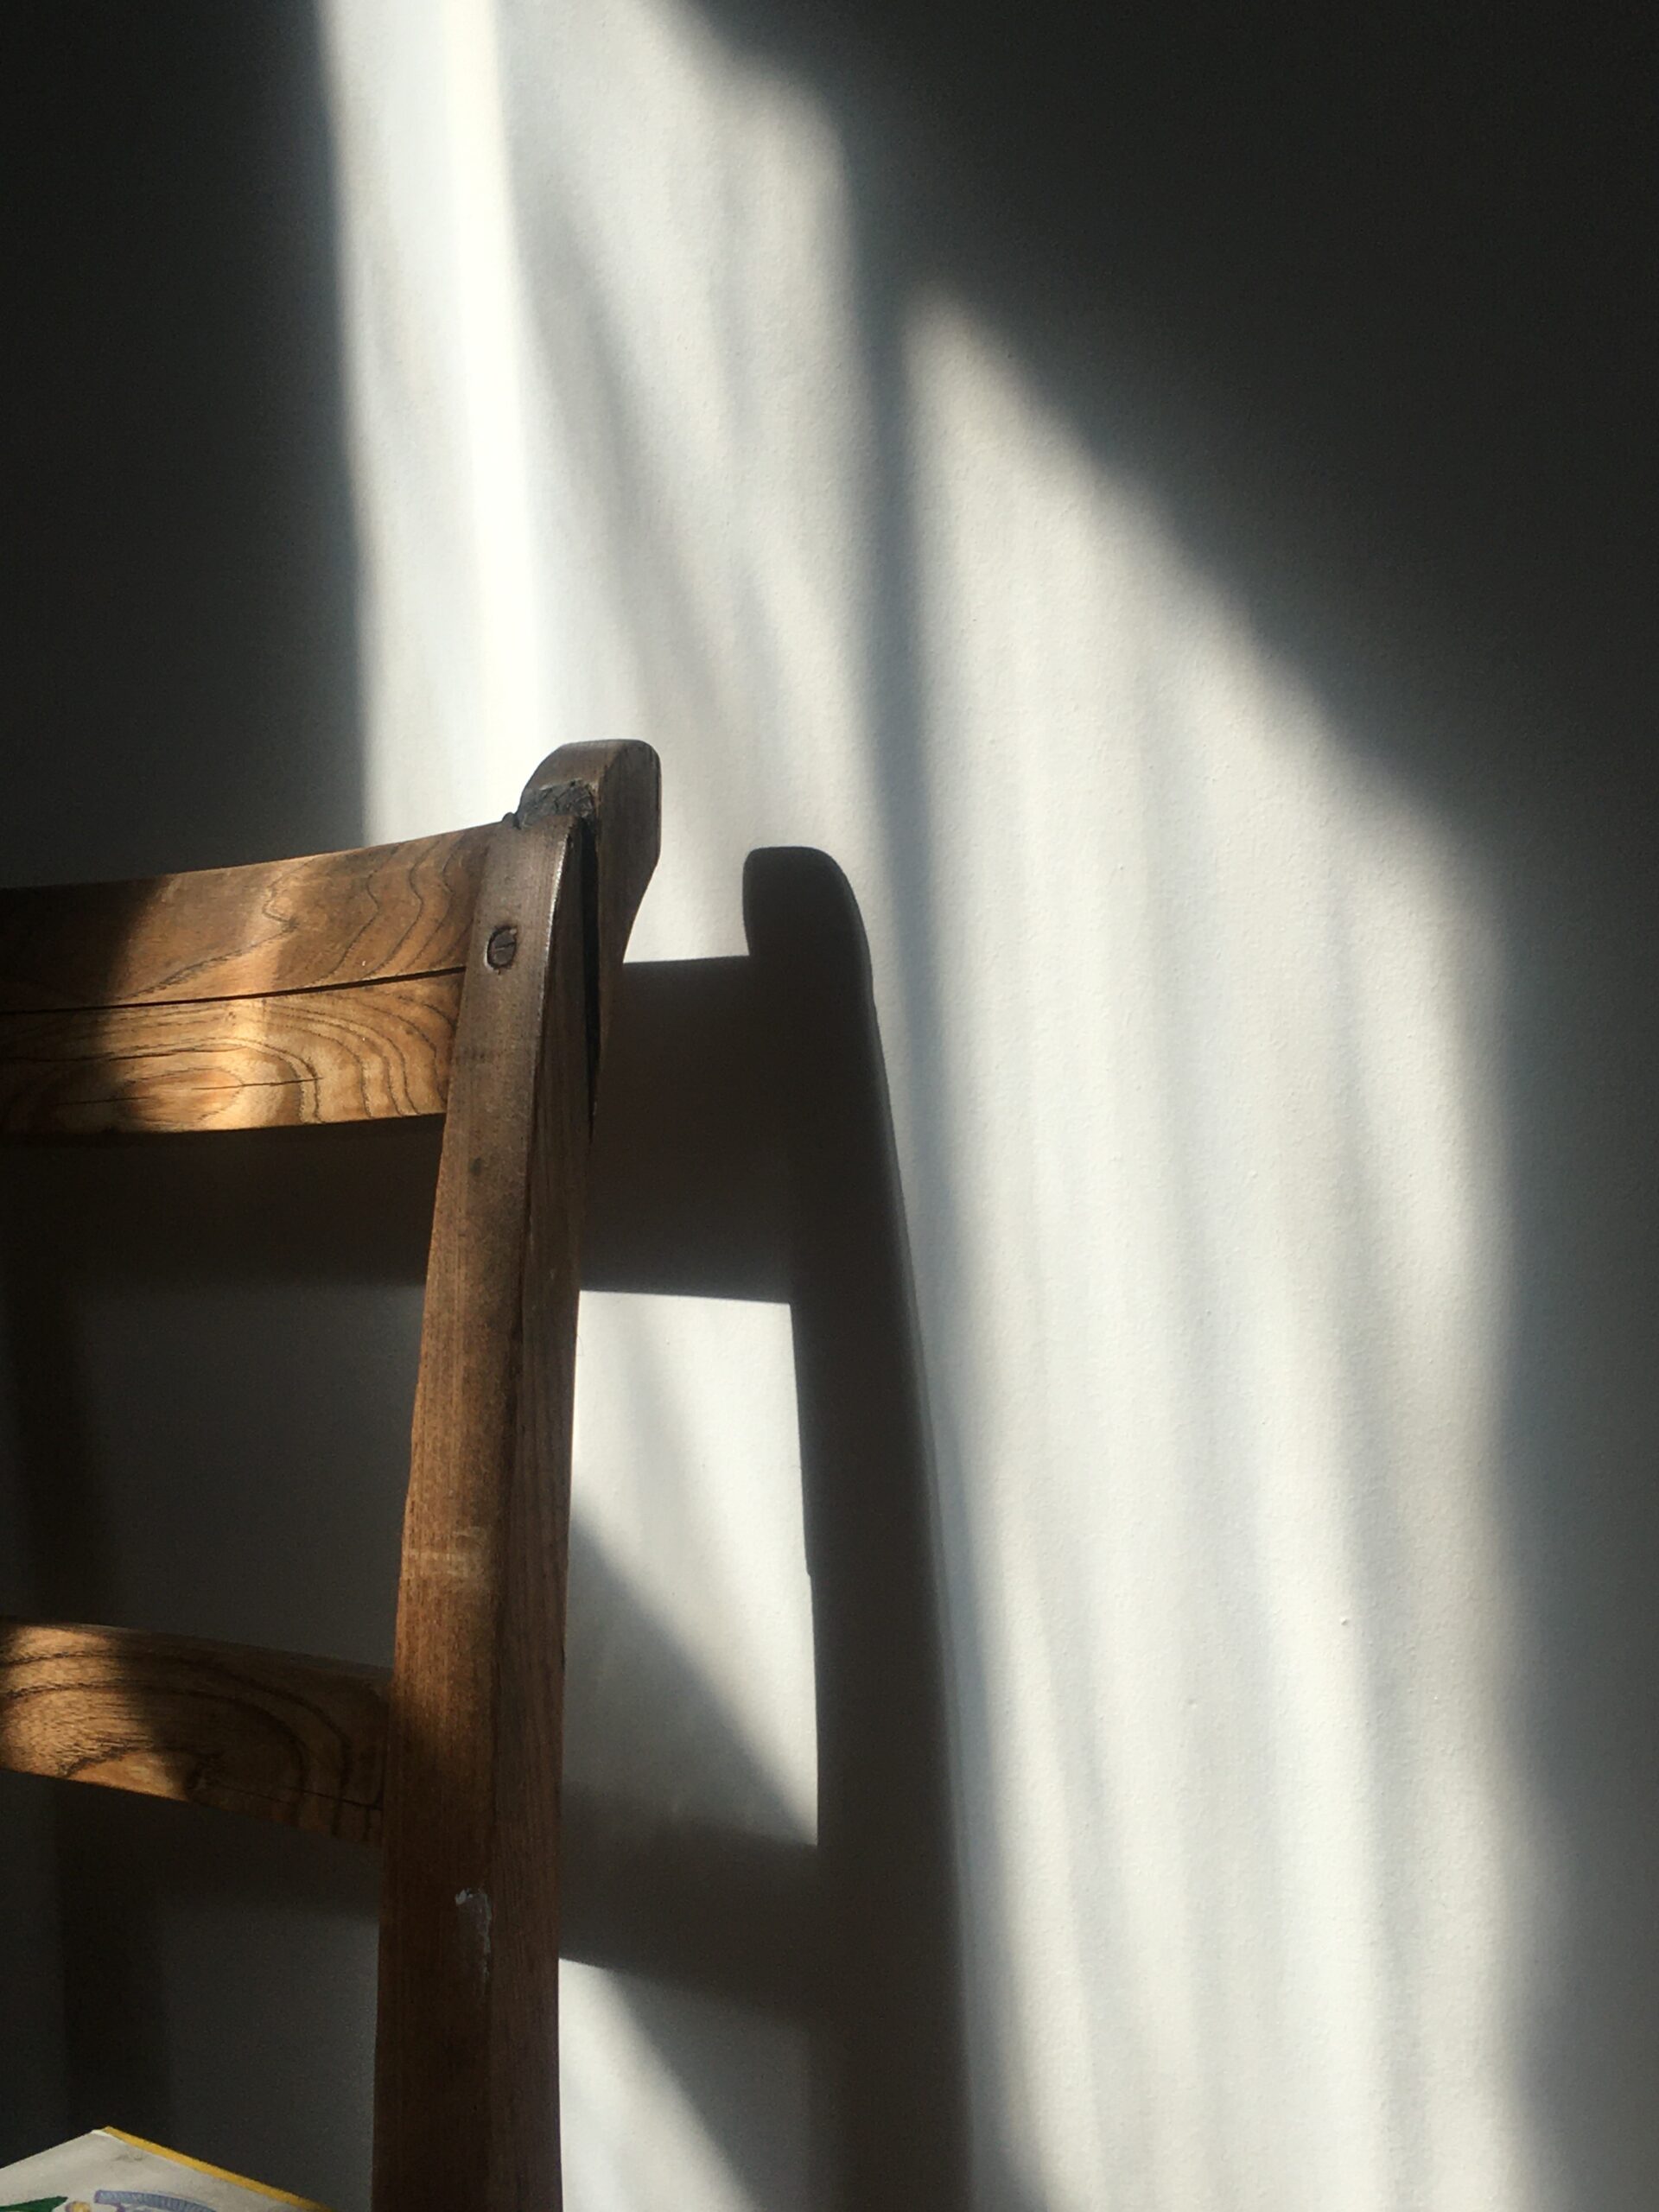 Chair in the afternoon light